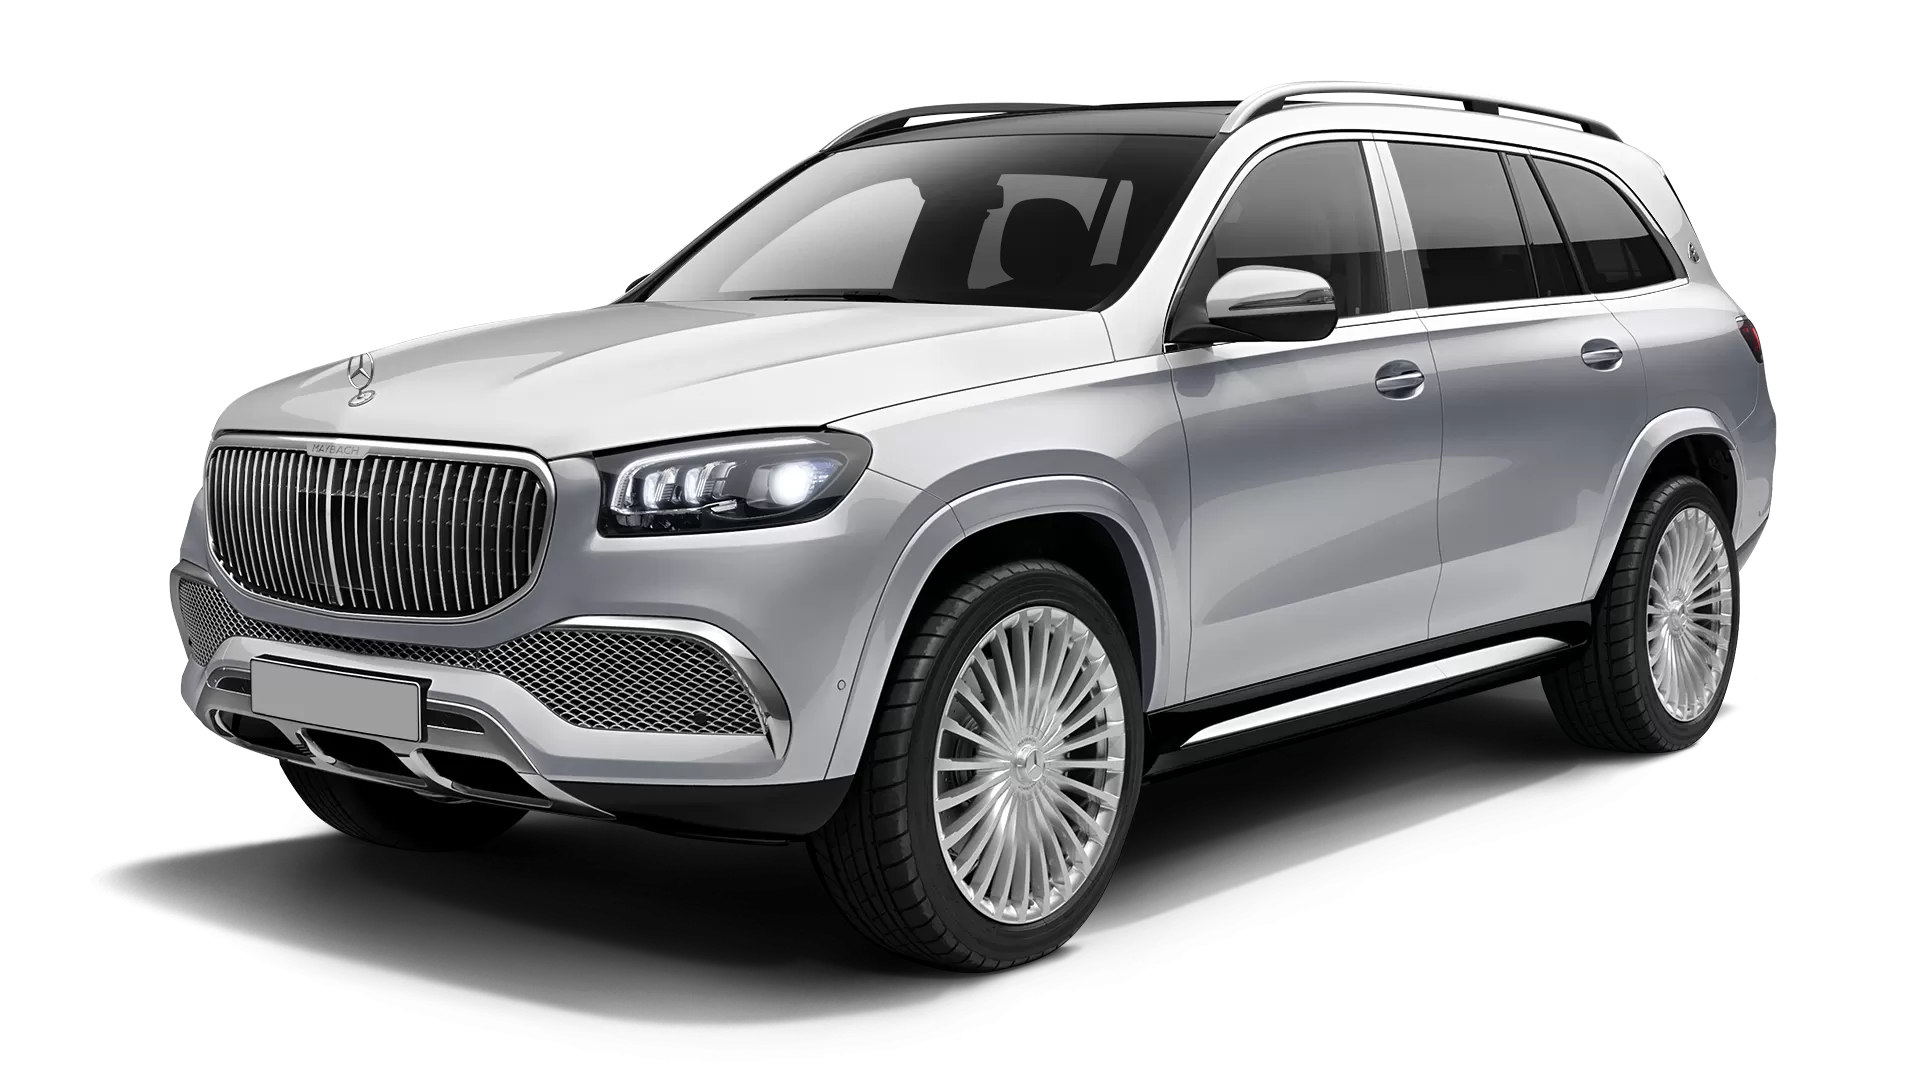 Mercedes Maybach GLS 600 stock front view in High Tech Silver & Diamond White color